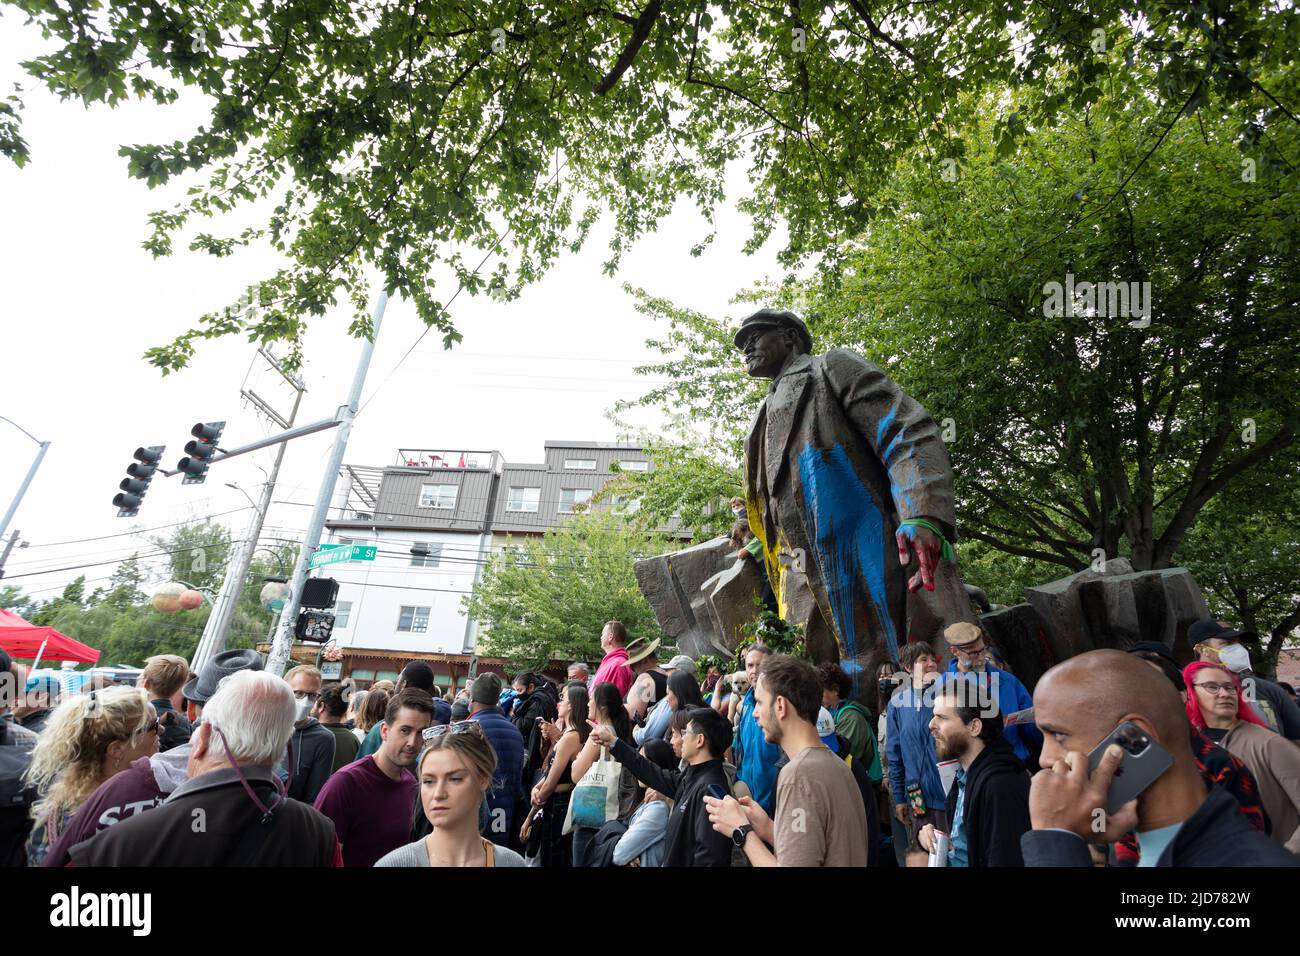 Seattle, Washington, USA. 18th June, 2022. Spectators crowd the landmark Statue of Vladimir Lenin at the Fremont Solstice Parade. The iconic, annual parade returned after a three-year hiatus due to the coronavirus pandemic. Credit: Paul Christian Gordon/Alamy Live News Stock Photo